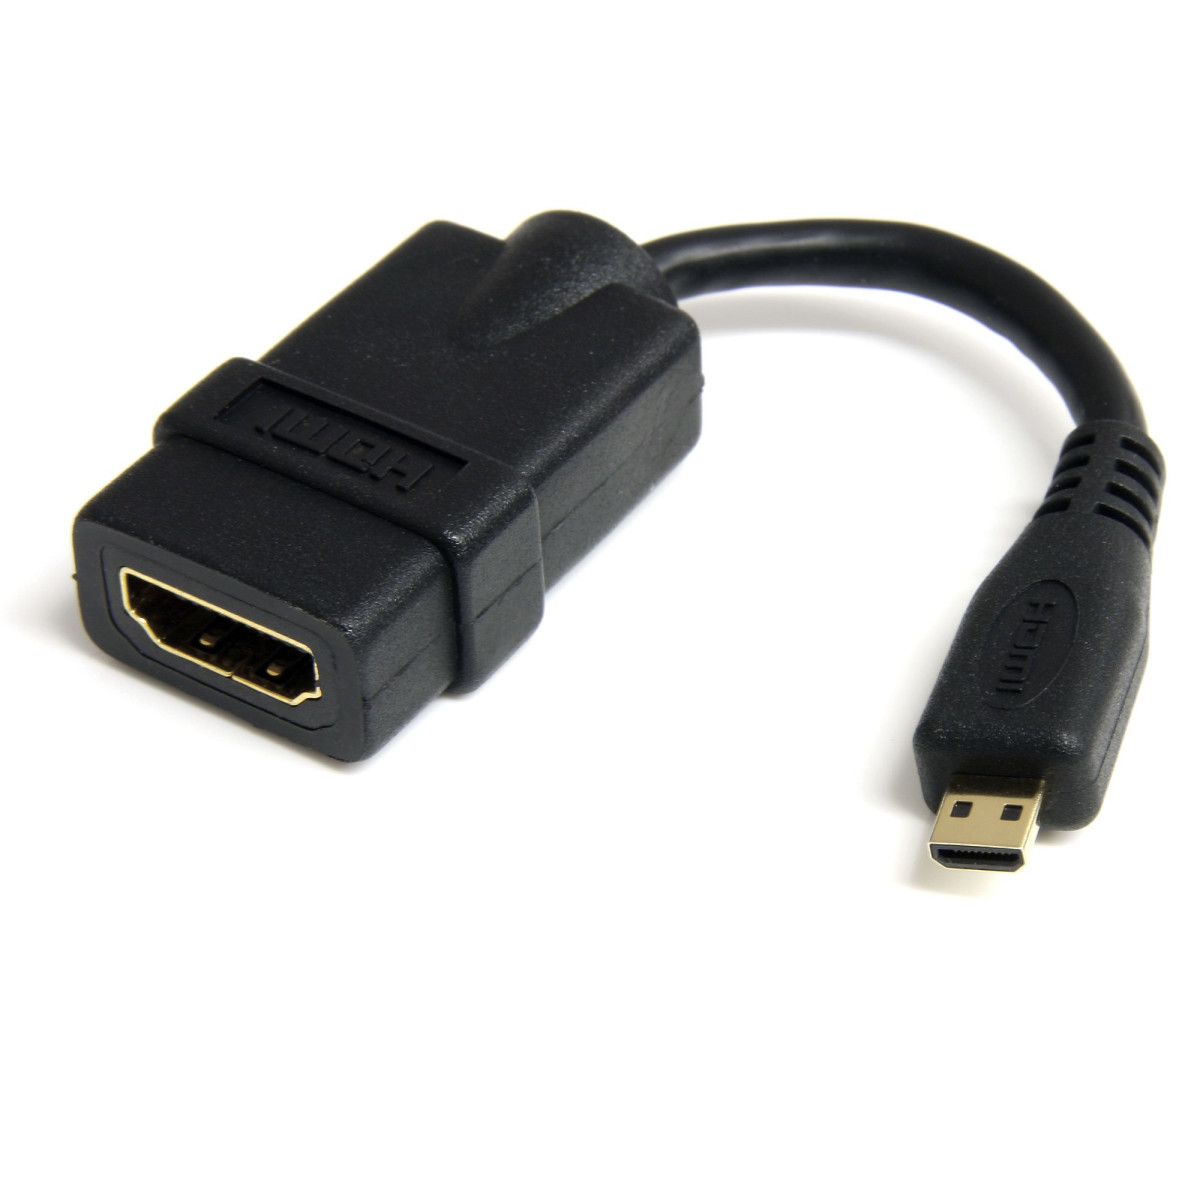 5 HS HDMI Adpt Cable w/Ethernet to HDMI